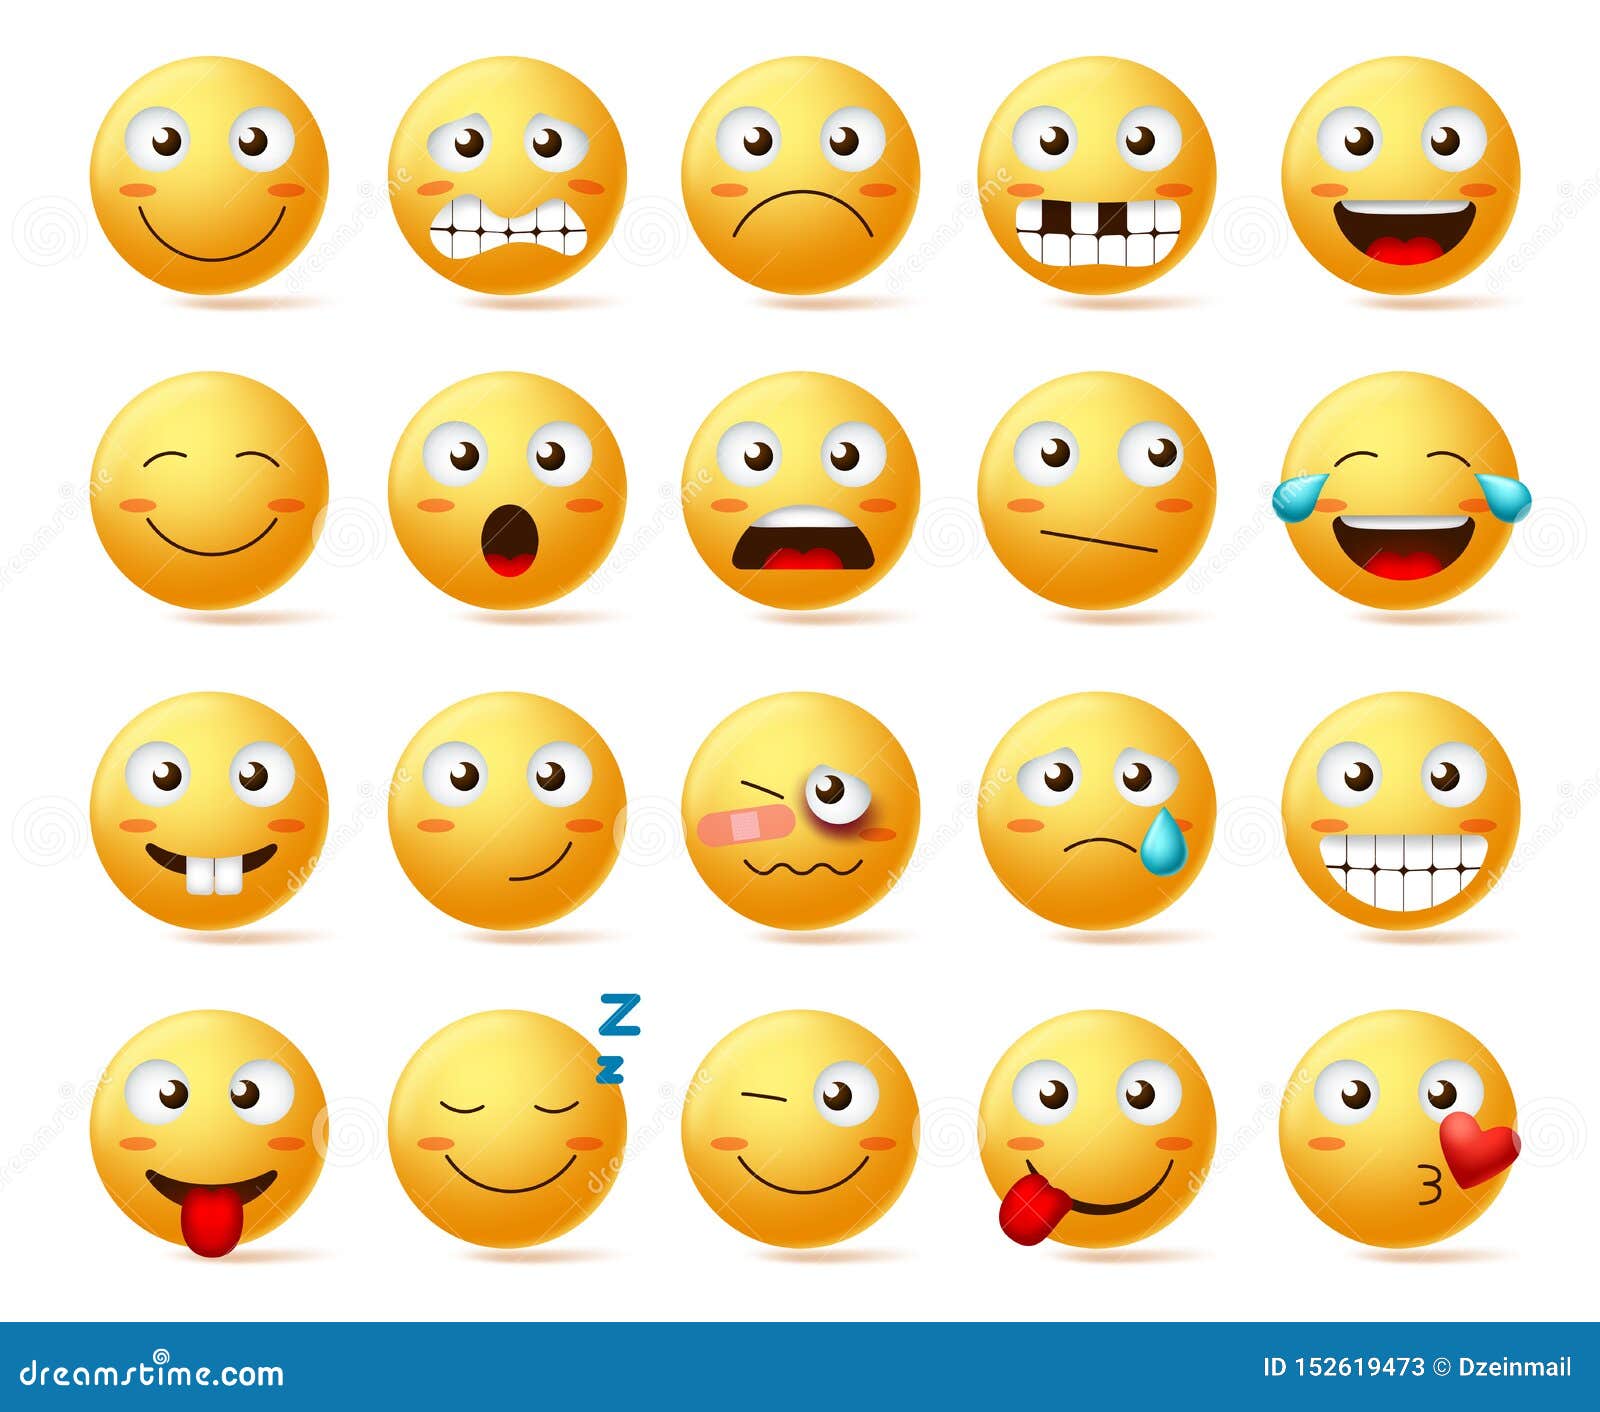 smileys  set. smiley face or yellow emoticons with various facial expressions and emotions